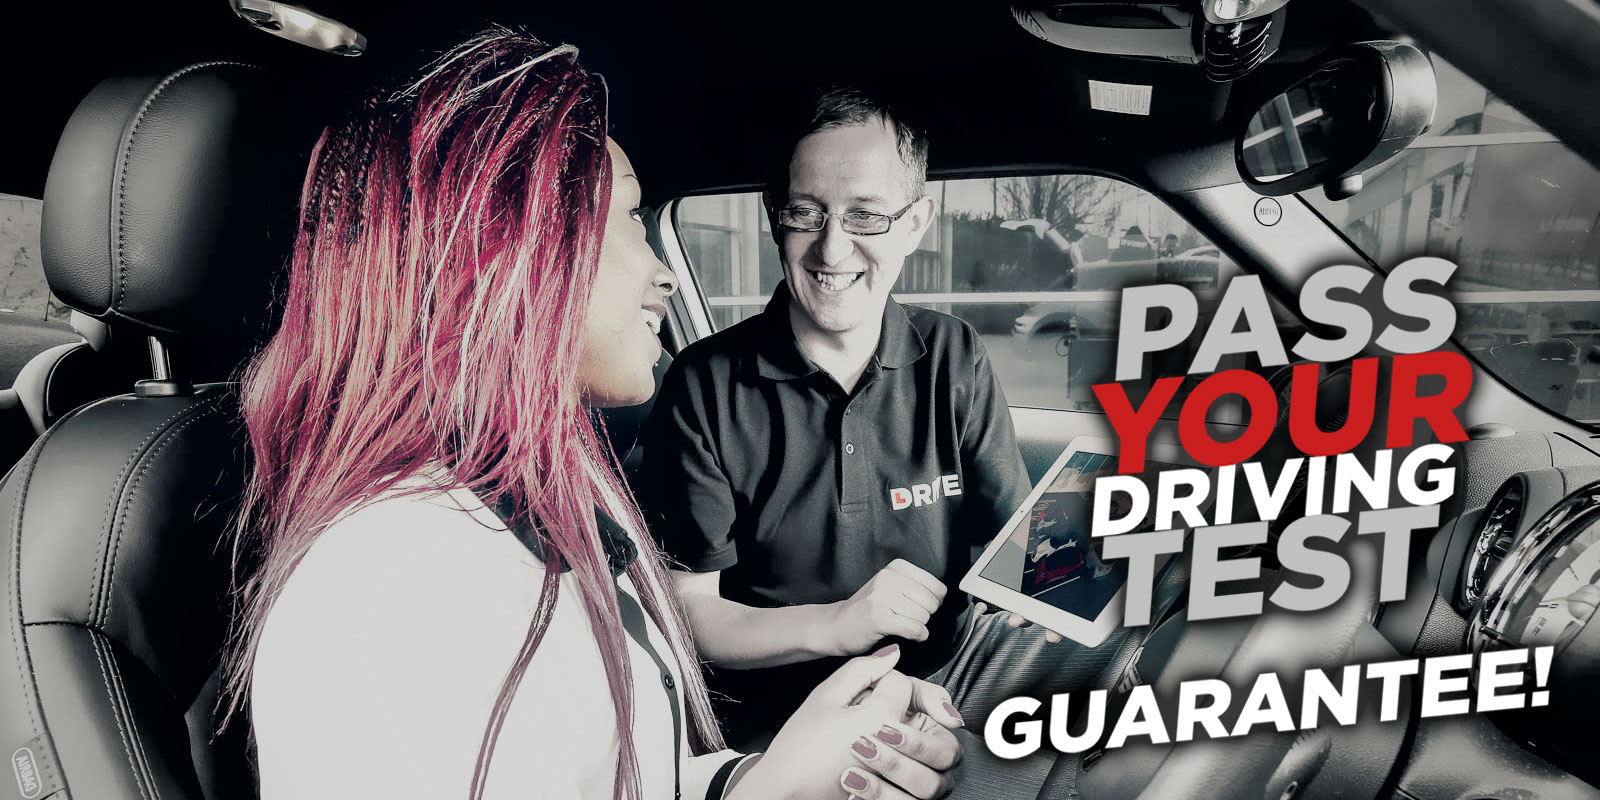 Pass your Driving Test Guarantee!